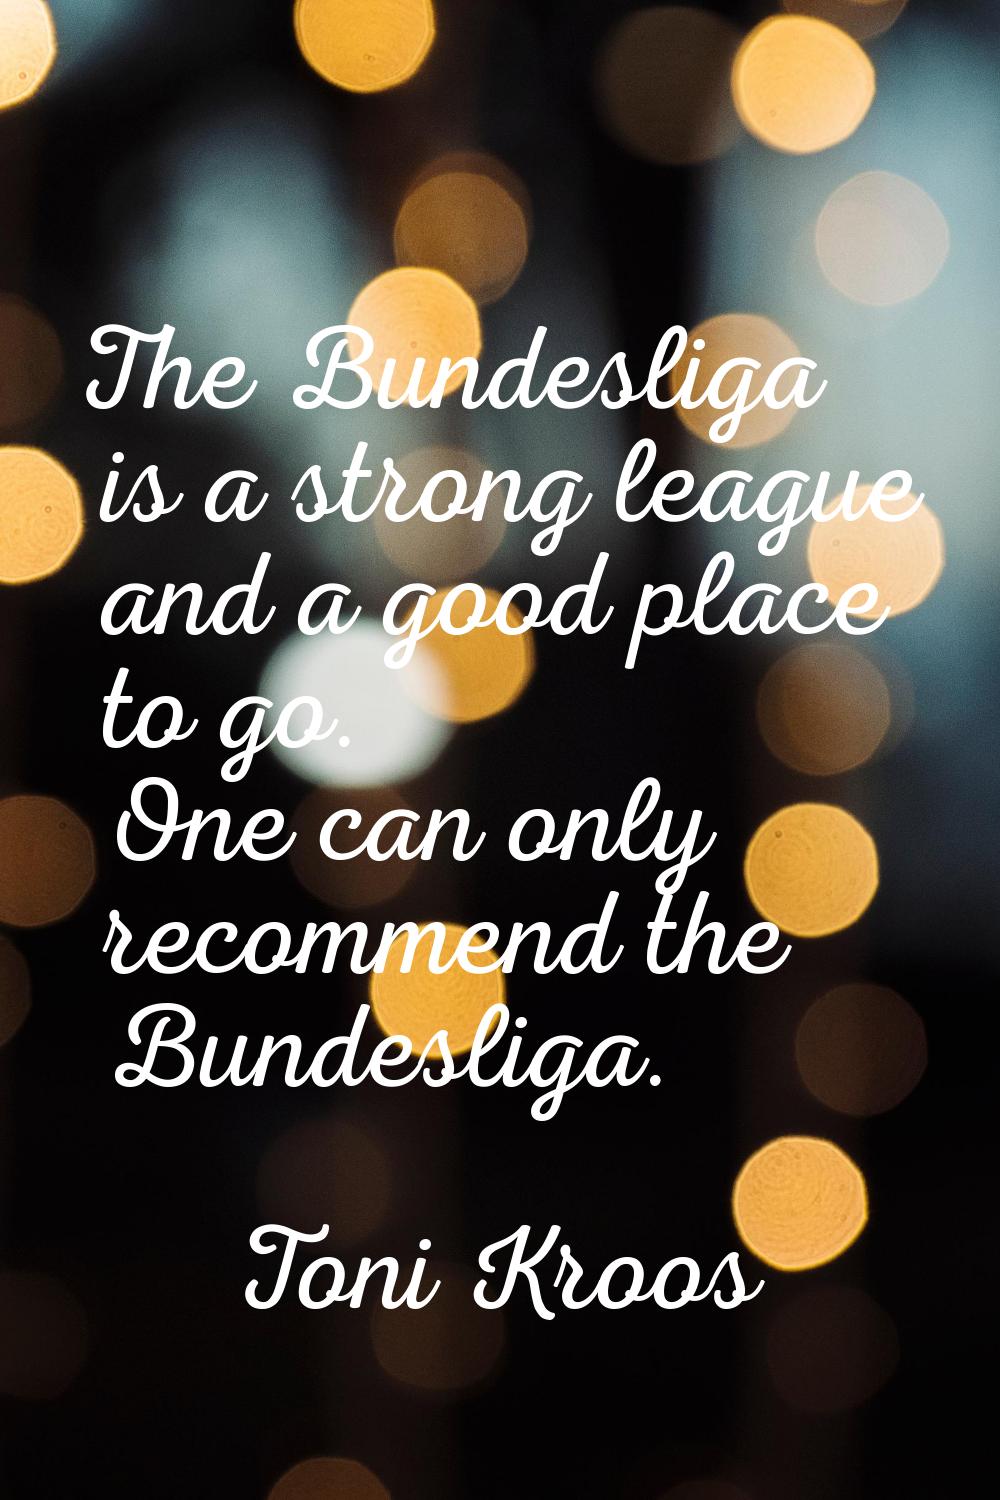 The Bundesliga is a strong league and a good place to go. One can only recommend the Bundesliga.